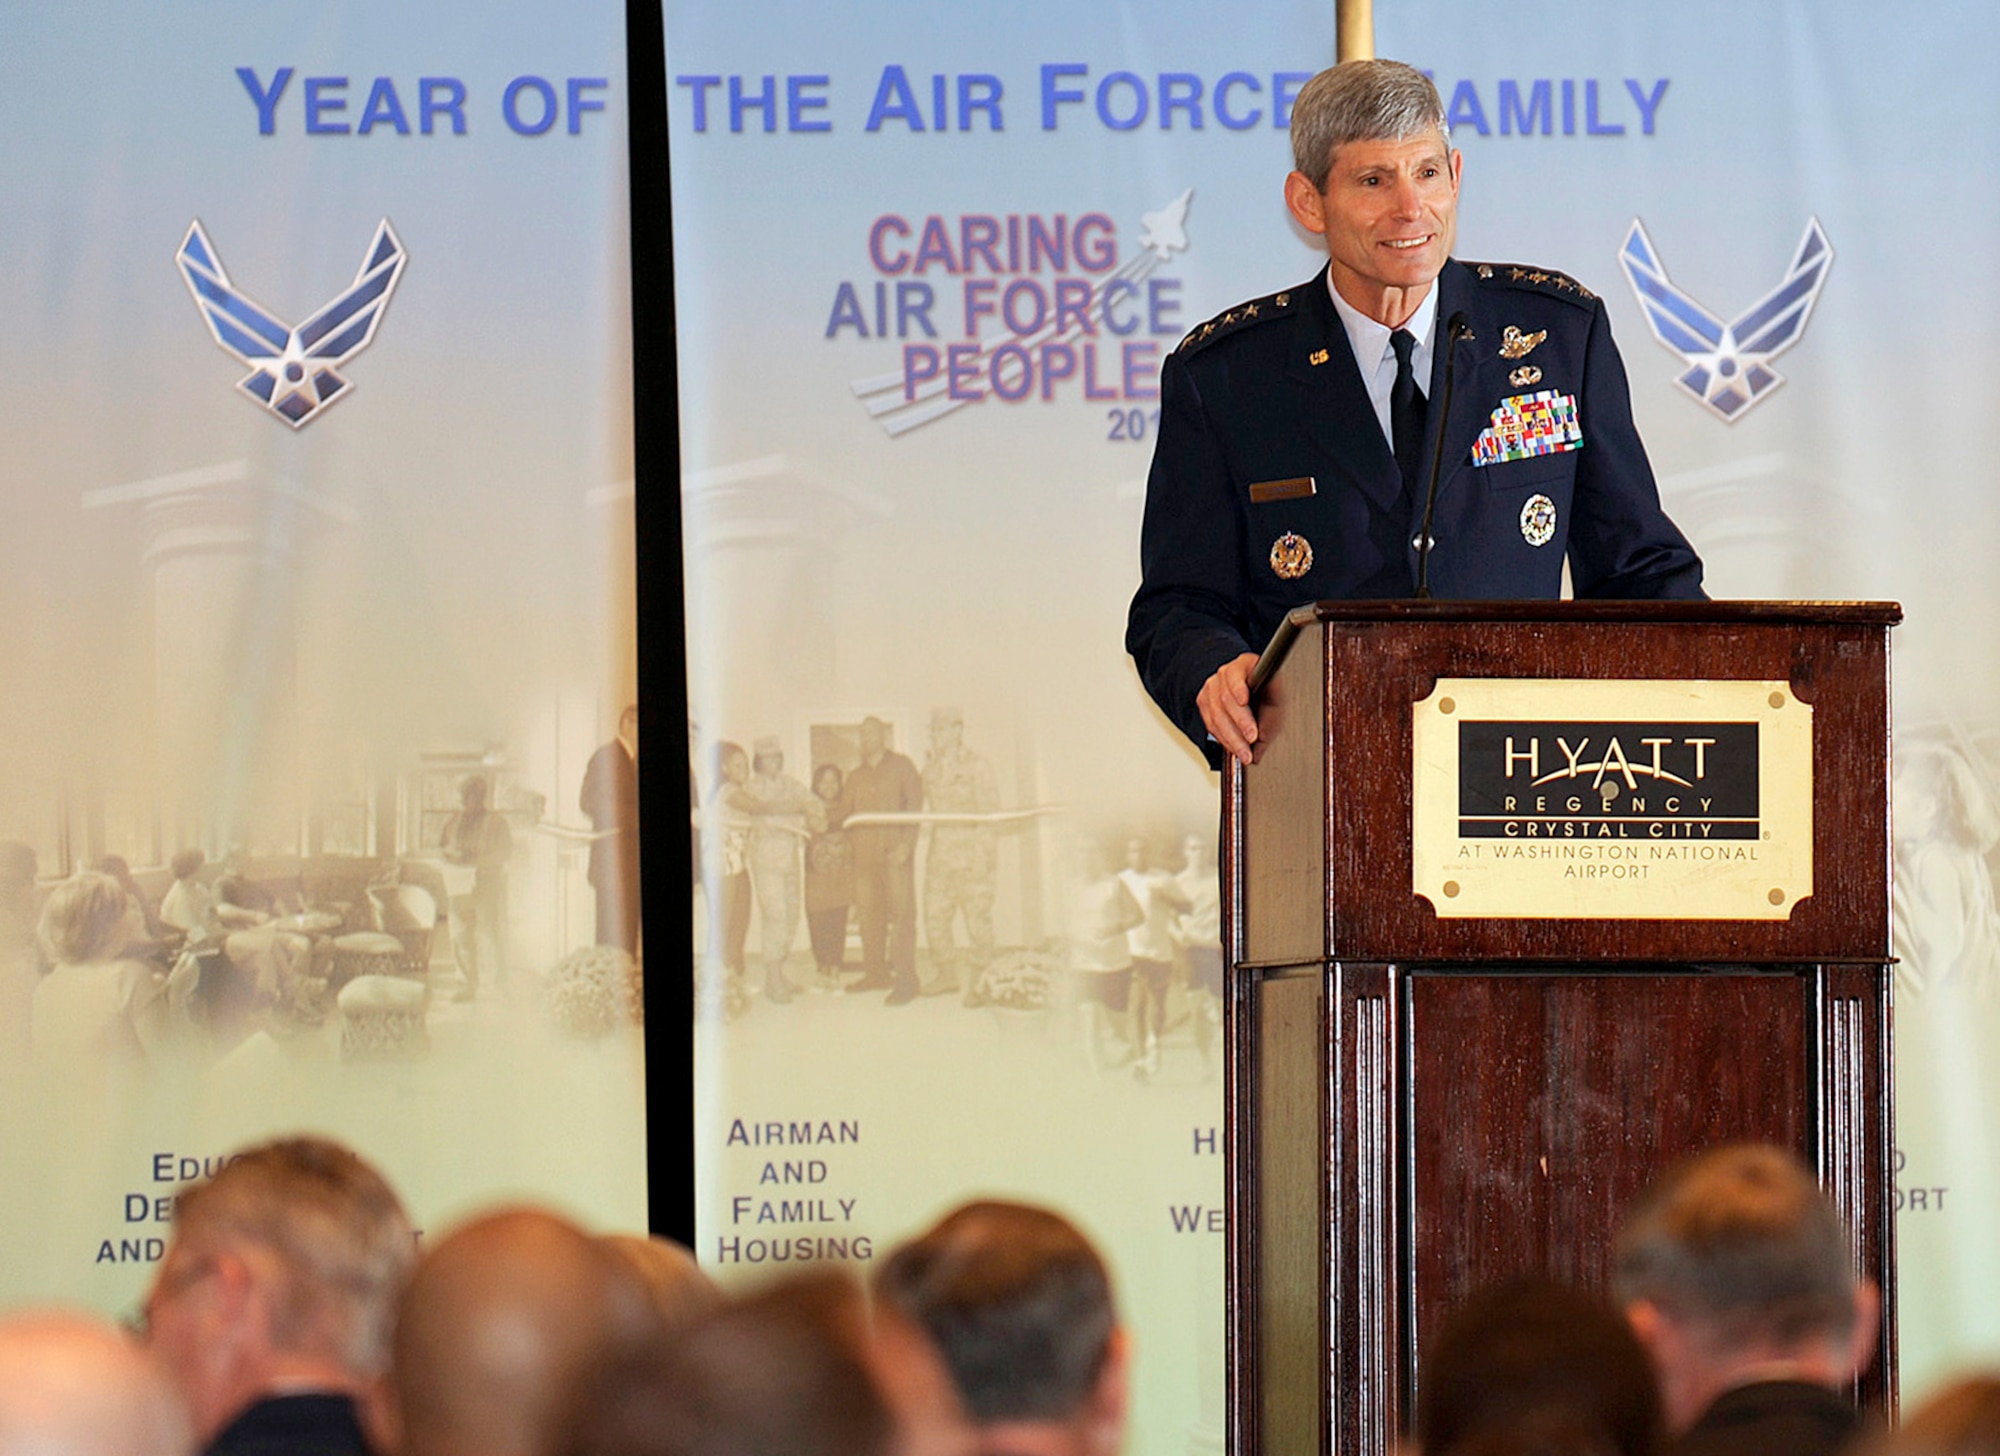 Air Force Chief of Staff Gen. Norton Schwartz addresses attendees April 19, 2010, at the second annual Caring for People forum in Washington, D.C.  Approximately 250 active-duty, Guard and Reserve Airmen and civilians gathered to address issues such as deployments, schools and housing, health and wellness, the unique challenges for families with special needs, single Airmen, and Guard and Reserve members.  (U.S. Air Force photo/Andy Morataya)